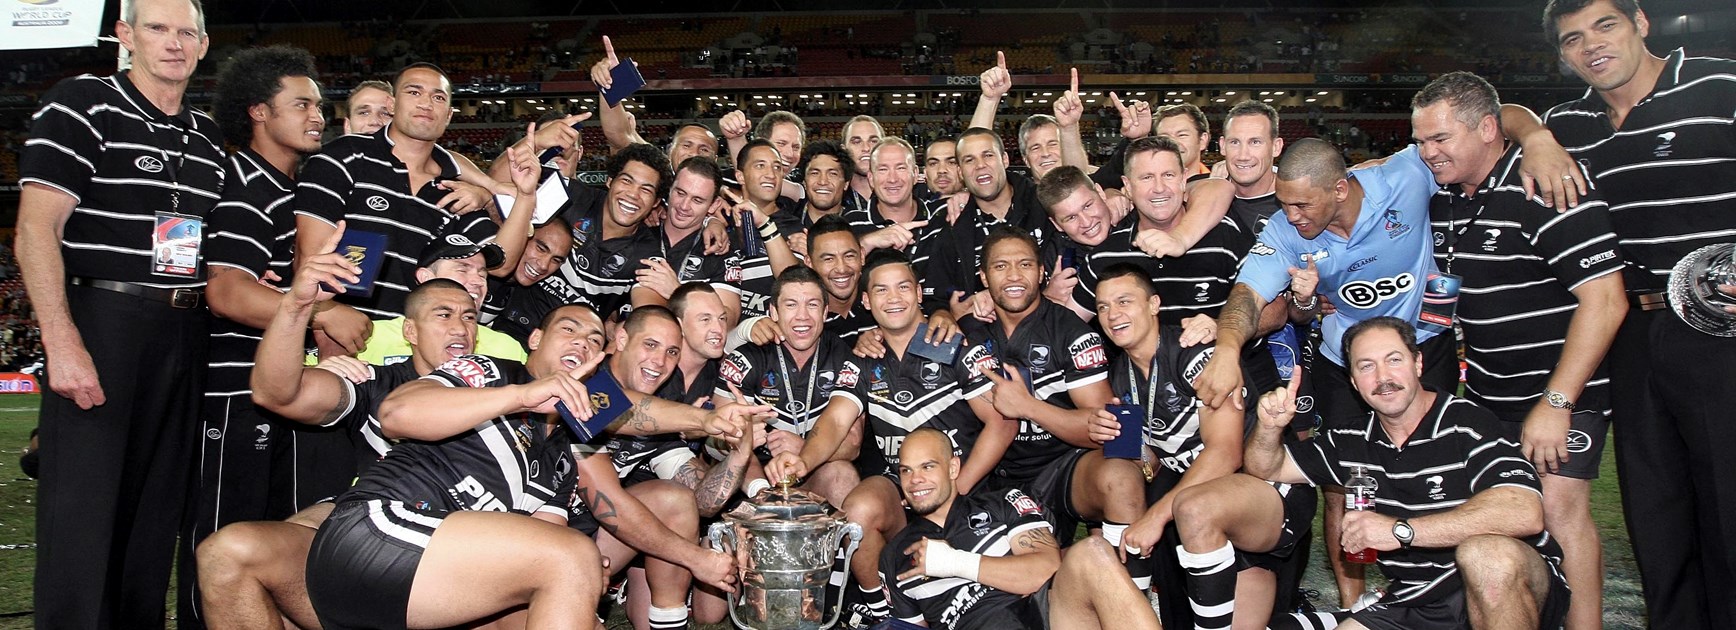 The New Zealand team that won the 2008 World Cup.